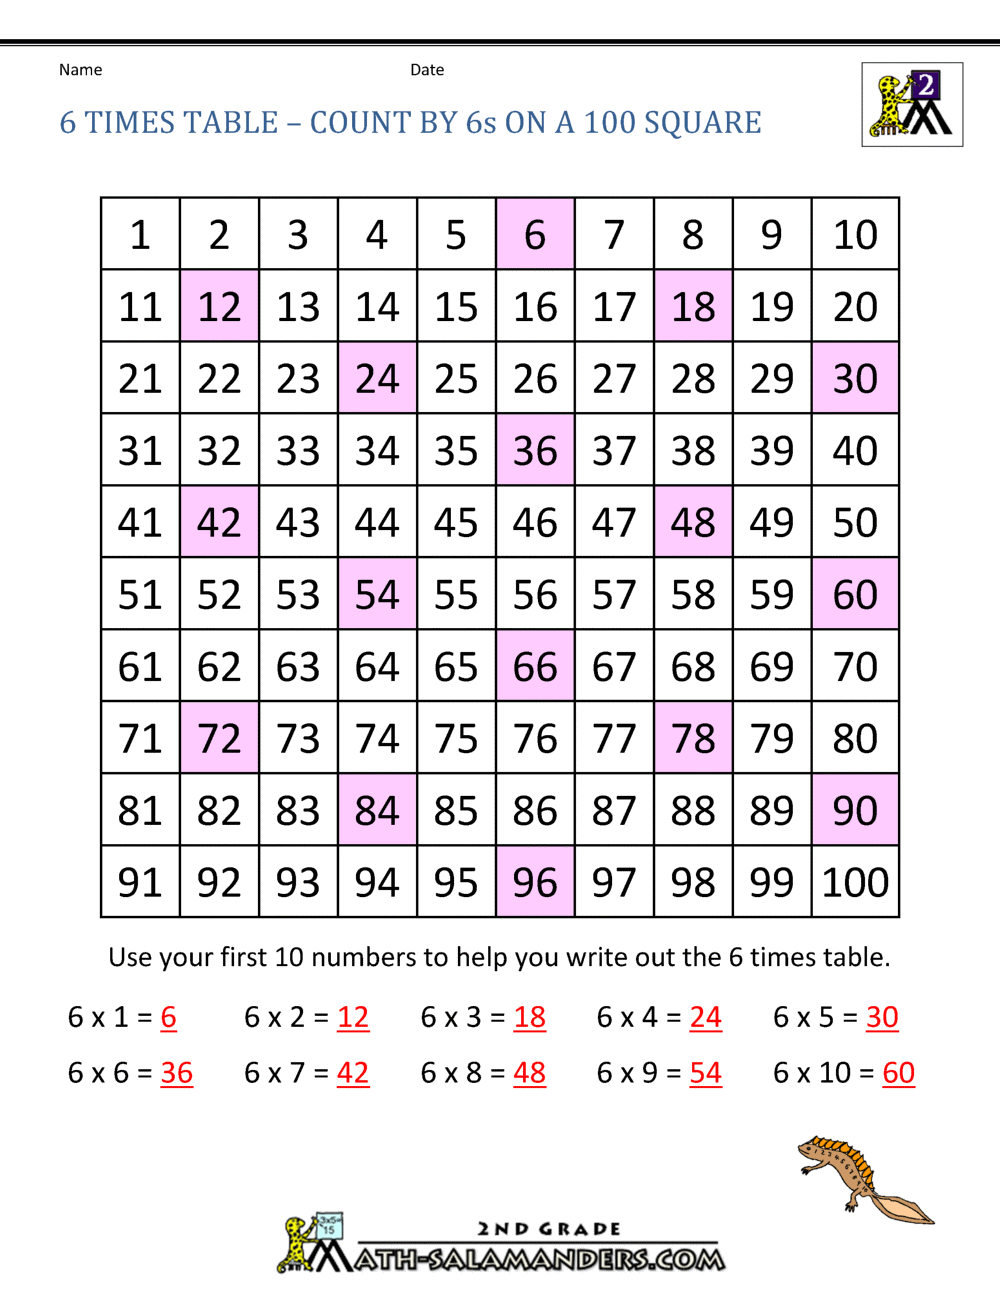 6-times-table